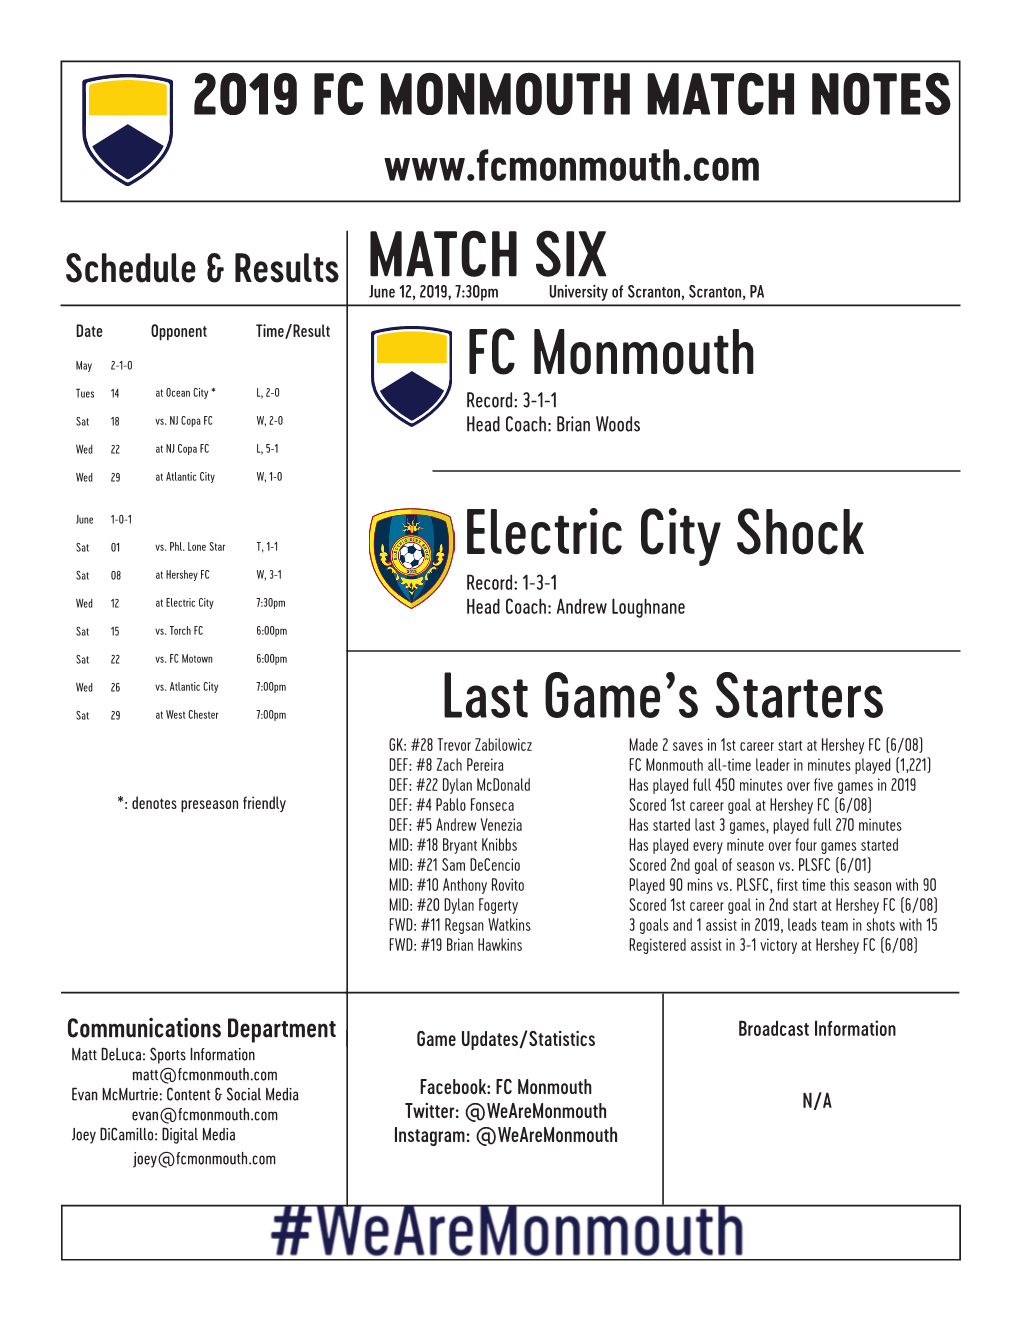 FC Monmouth Electric City Shock MATCH SIX Last Game's Starters